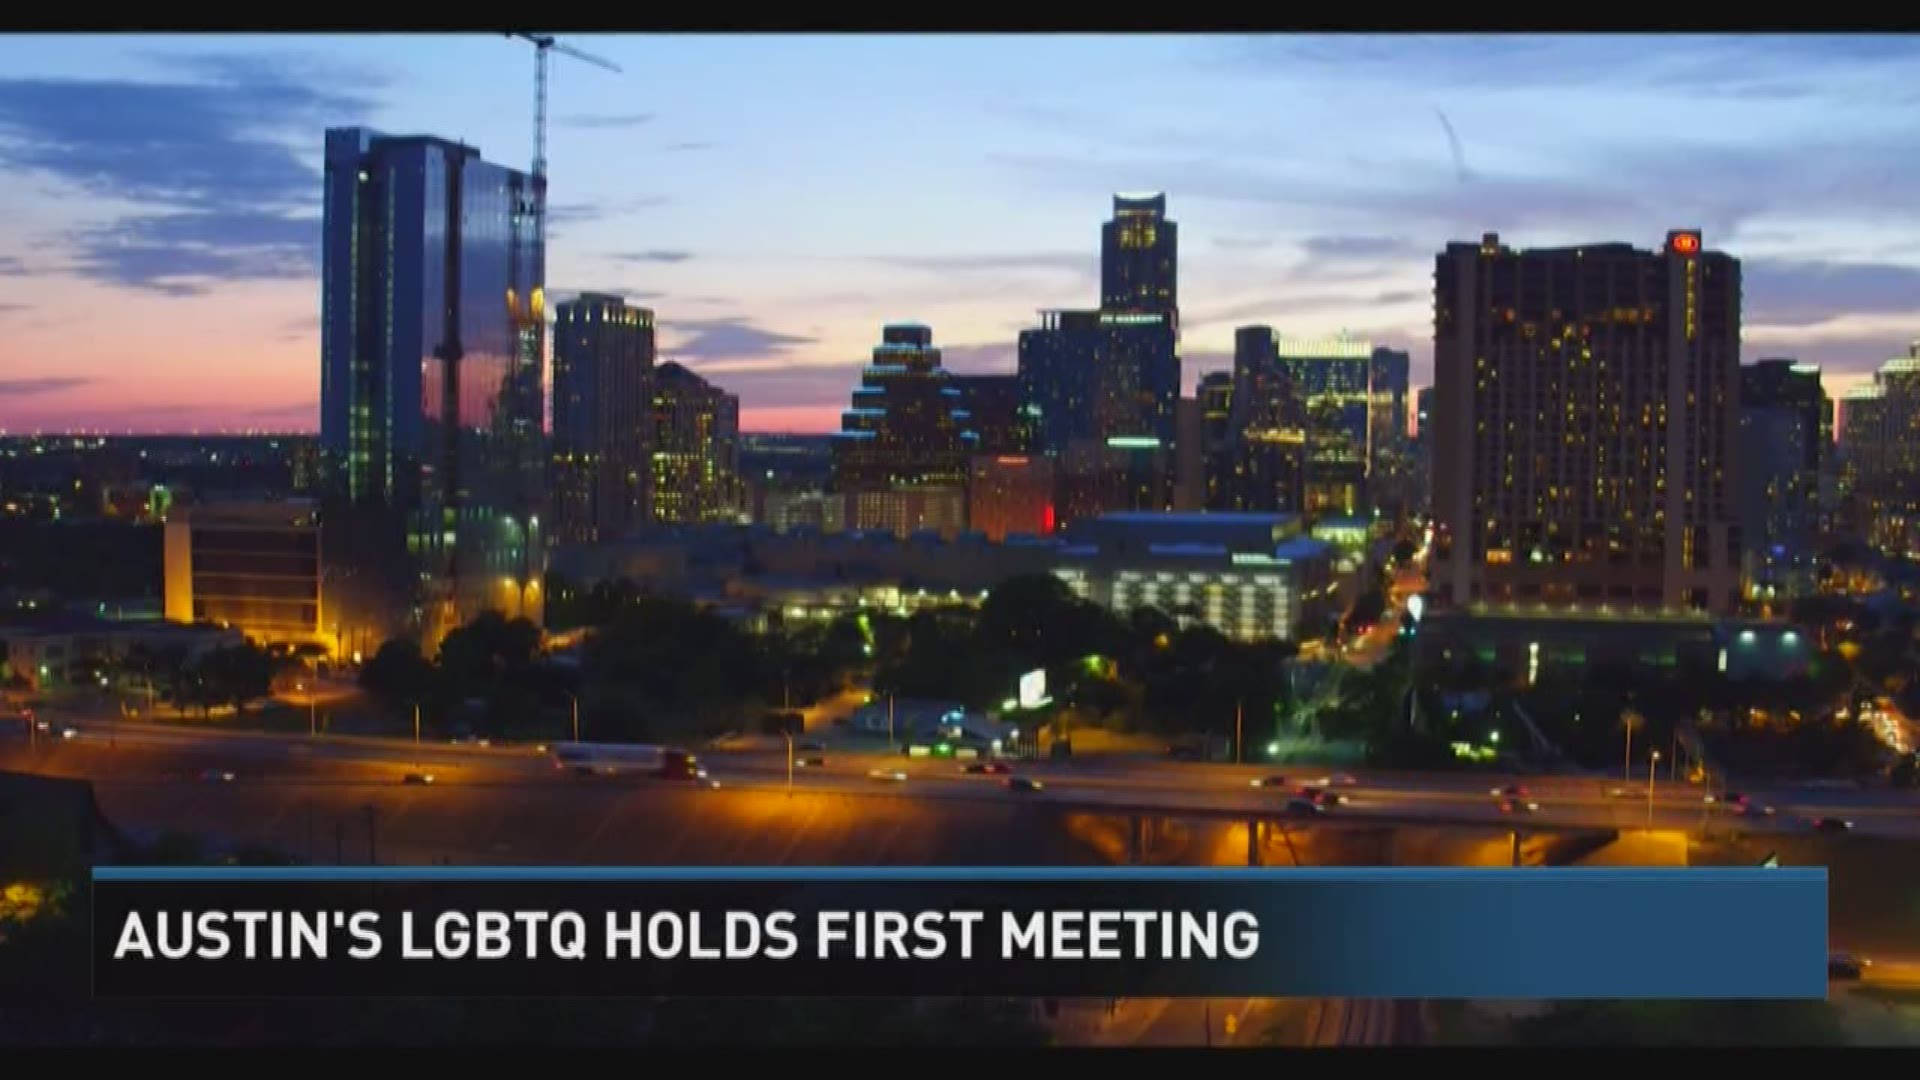 Austin prides itself on being a welcoming community, open to all.